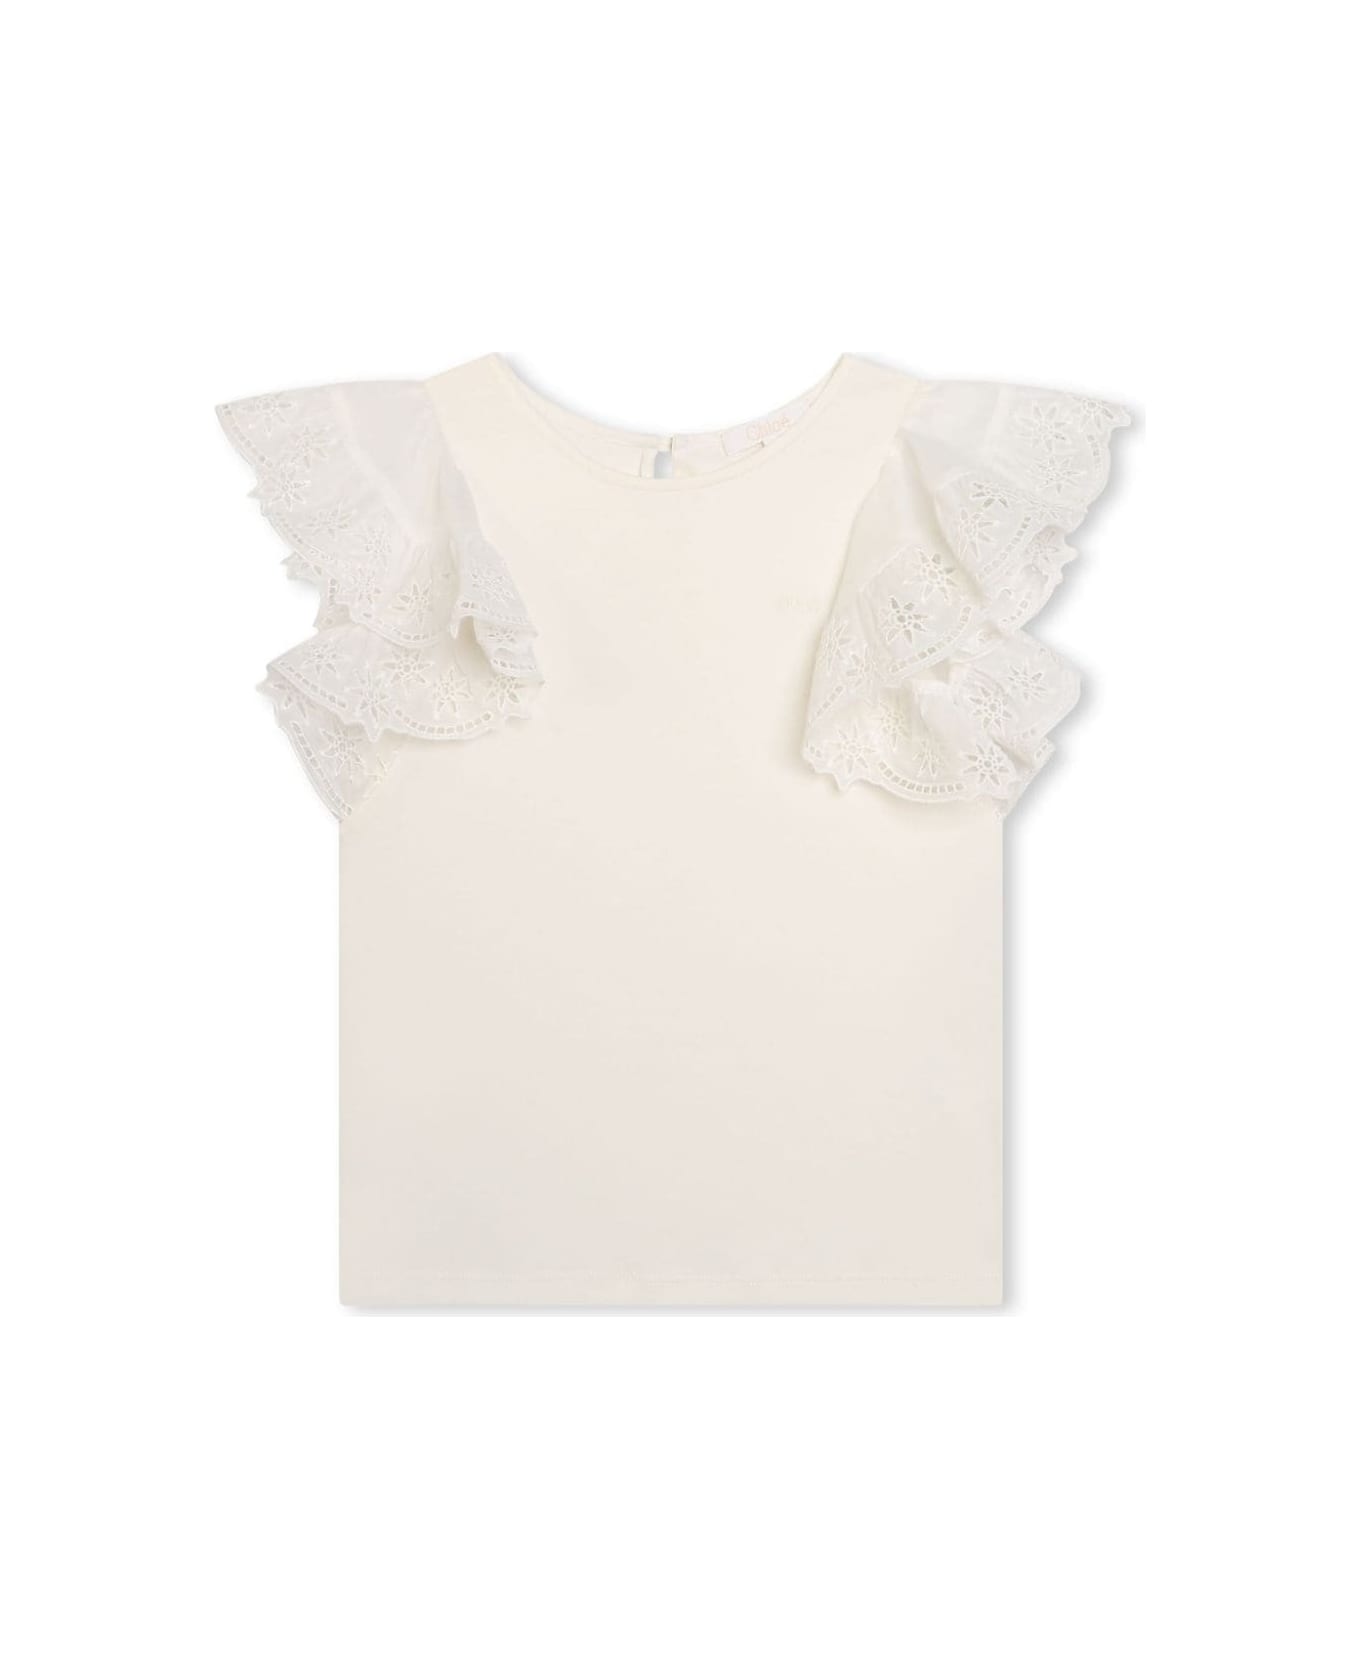 Chloé White Top With Embroidered Ruffles - White トップス